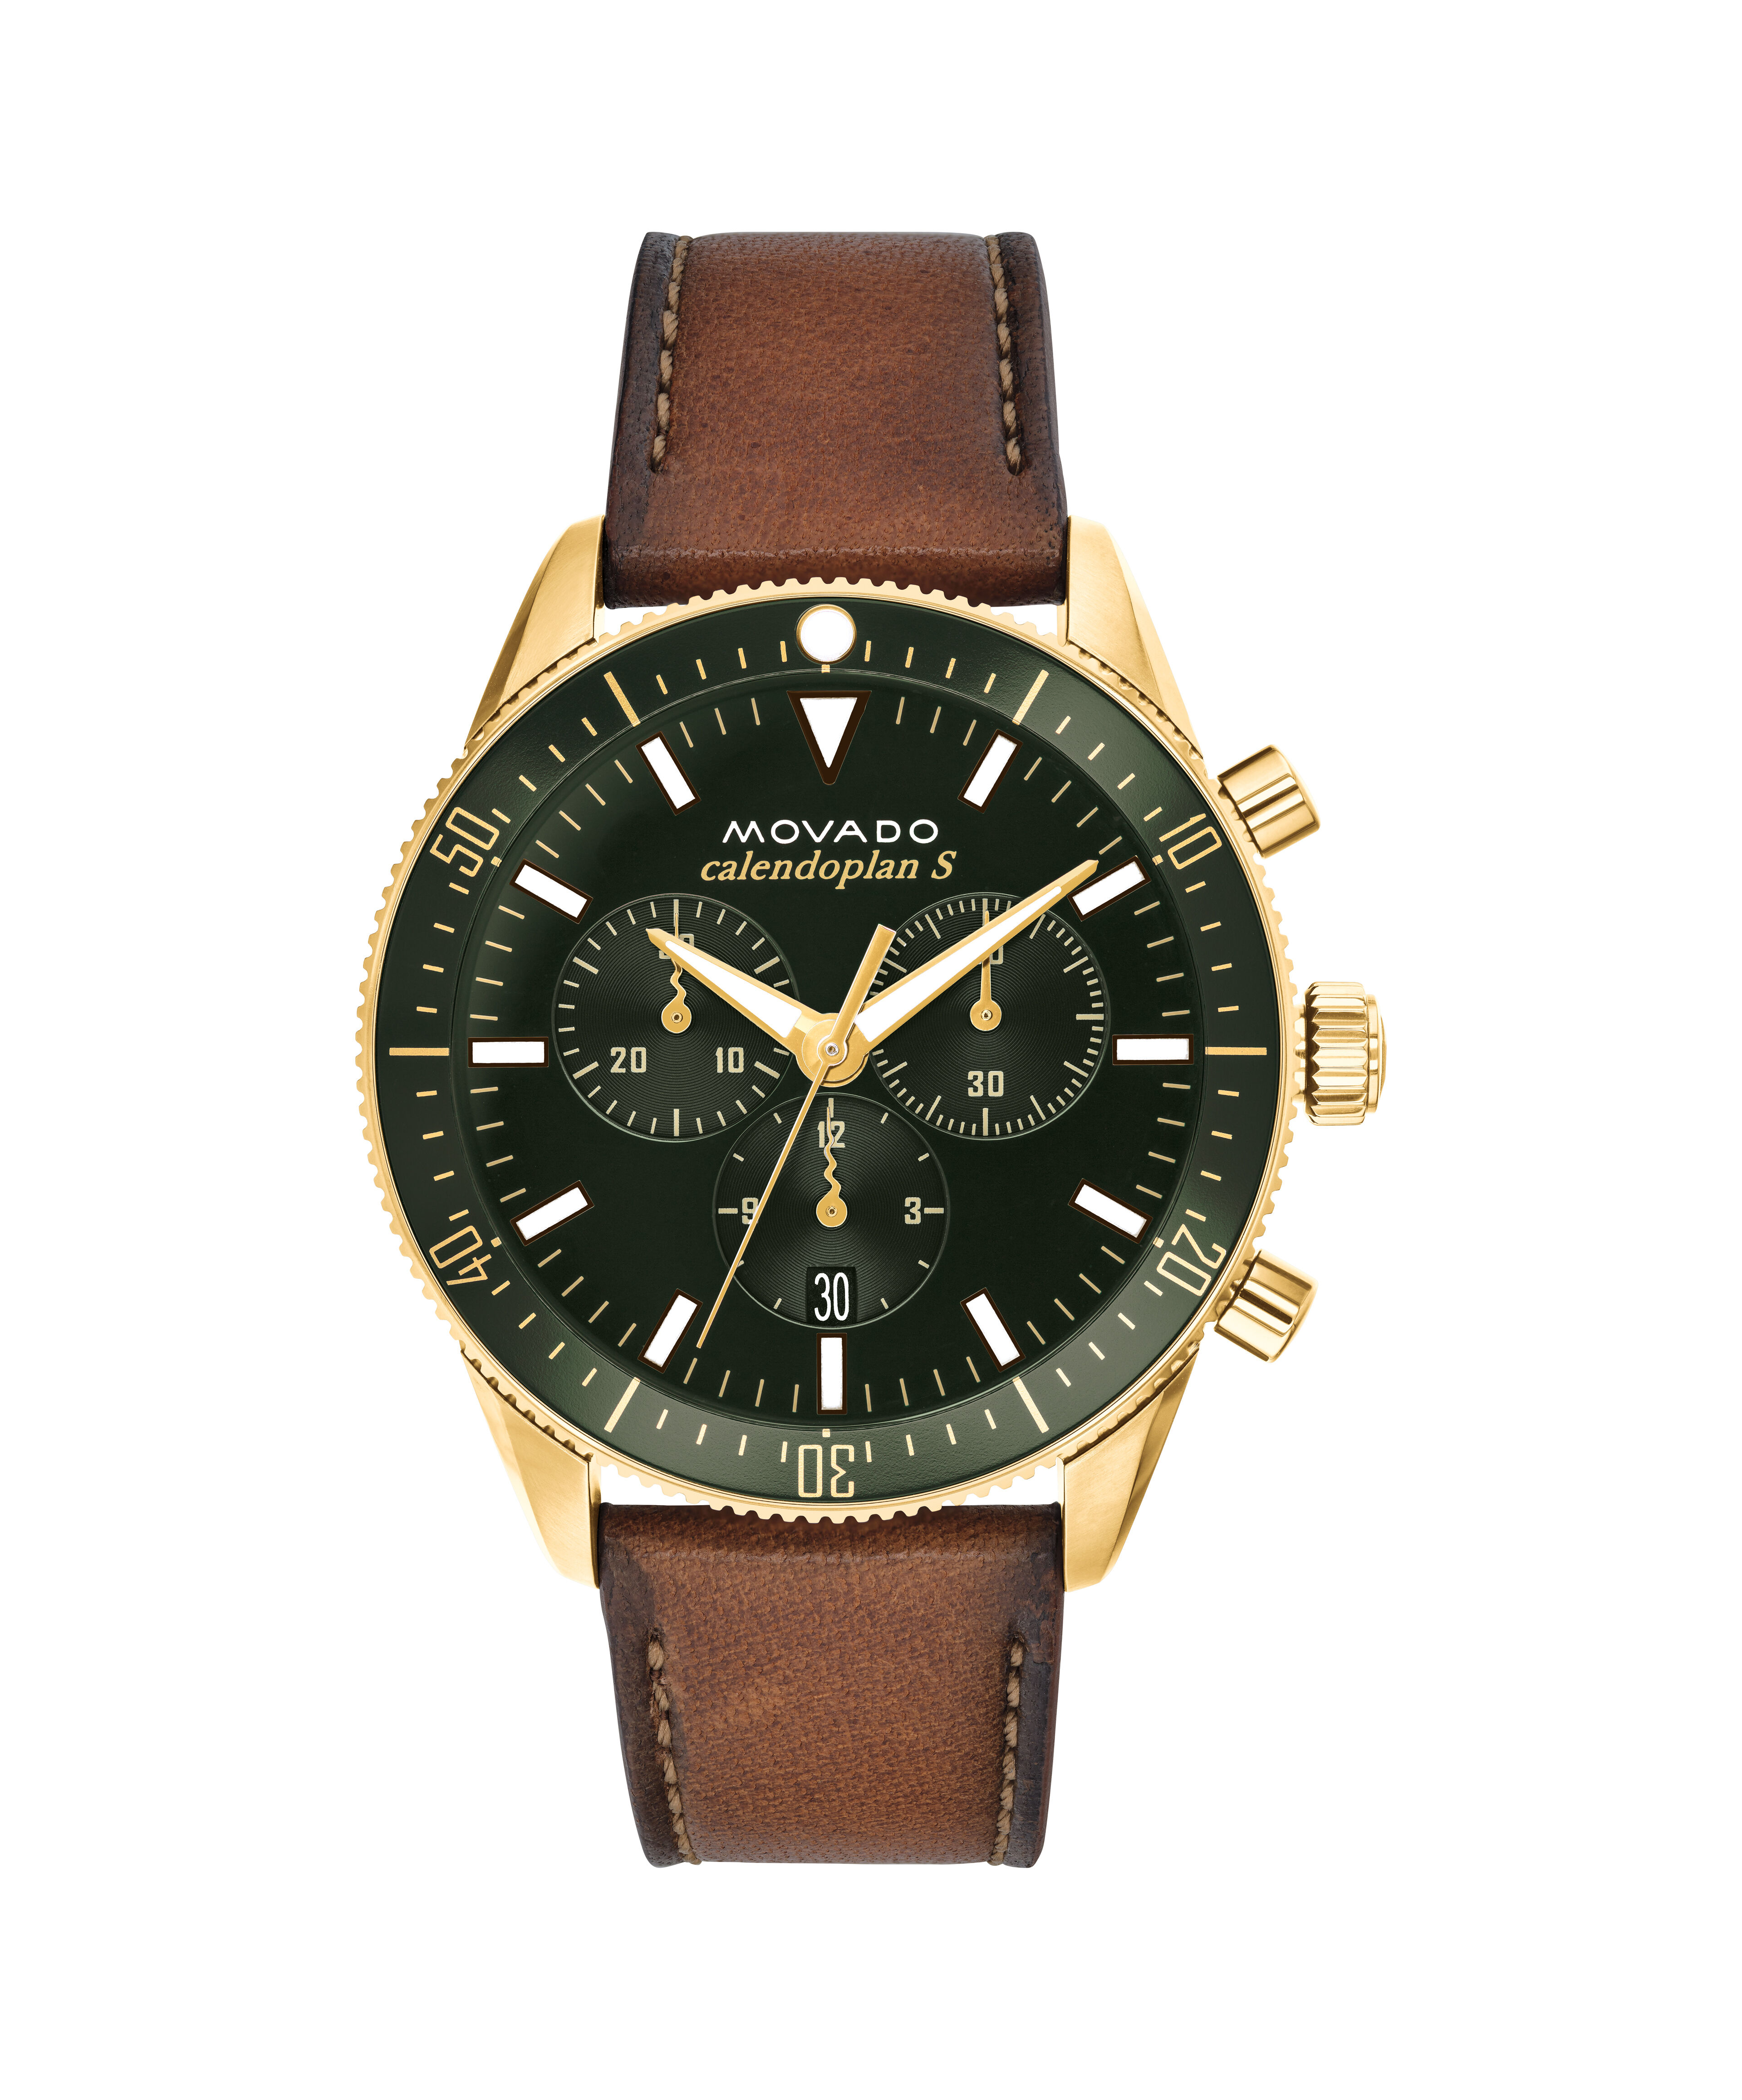 Buy Replica Watches Online Cheap